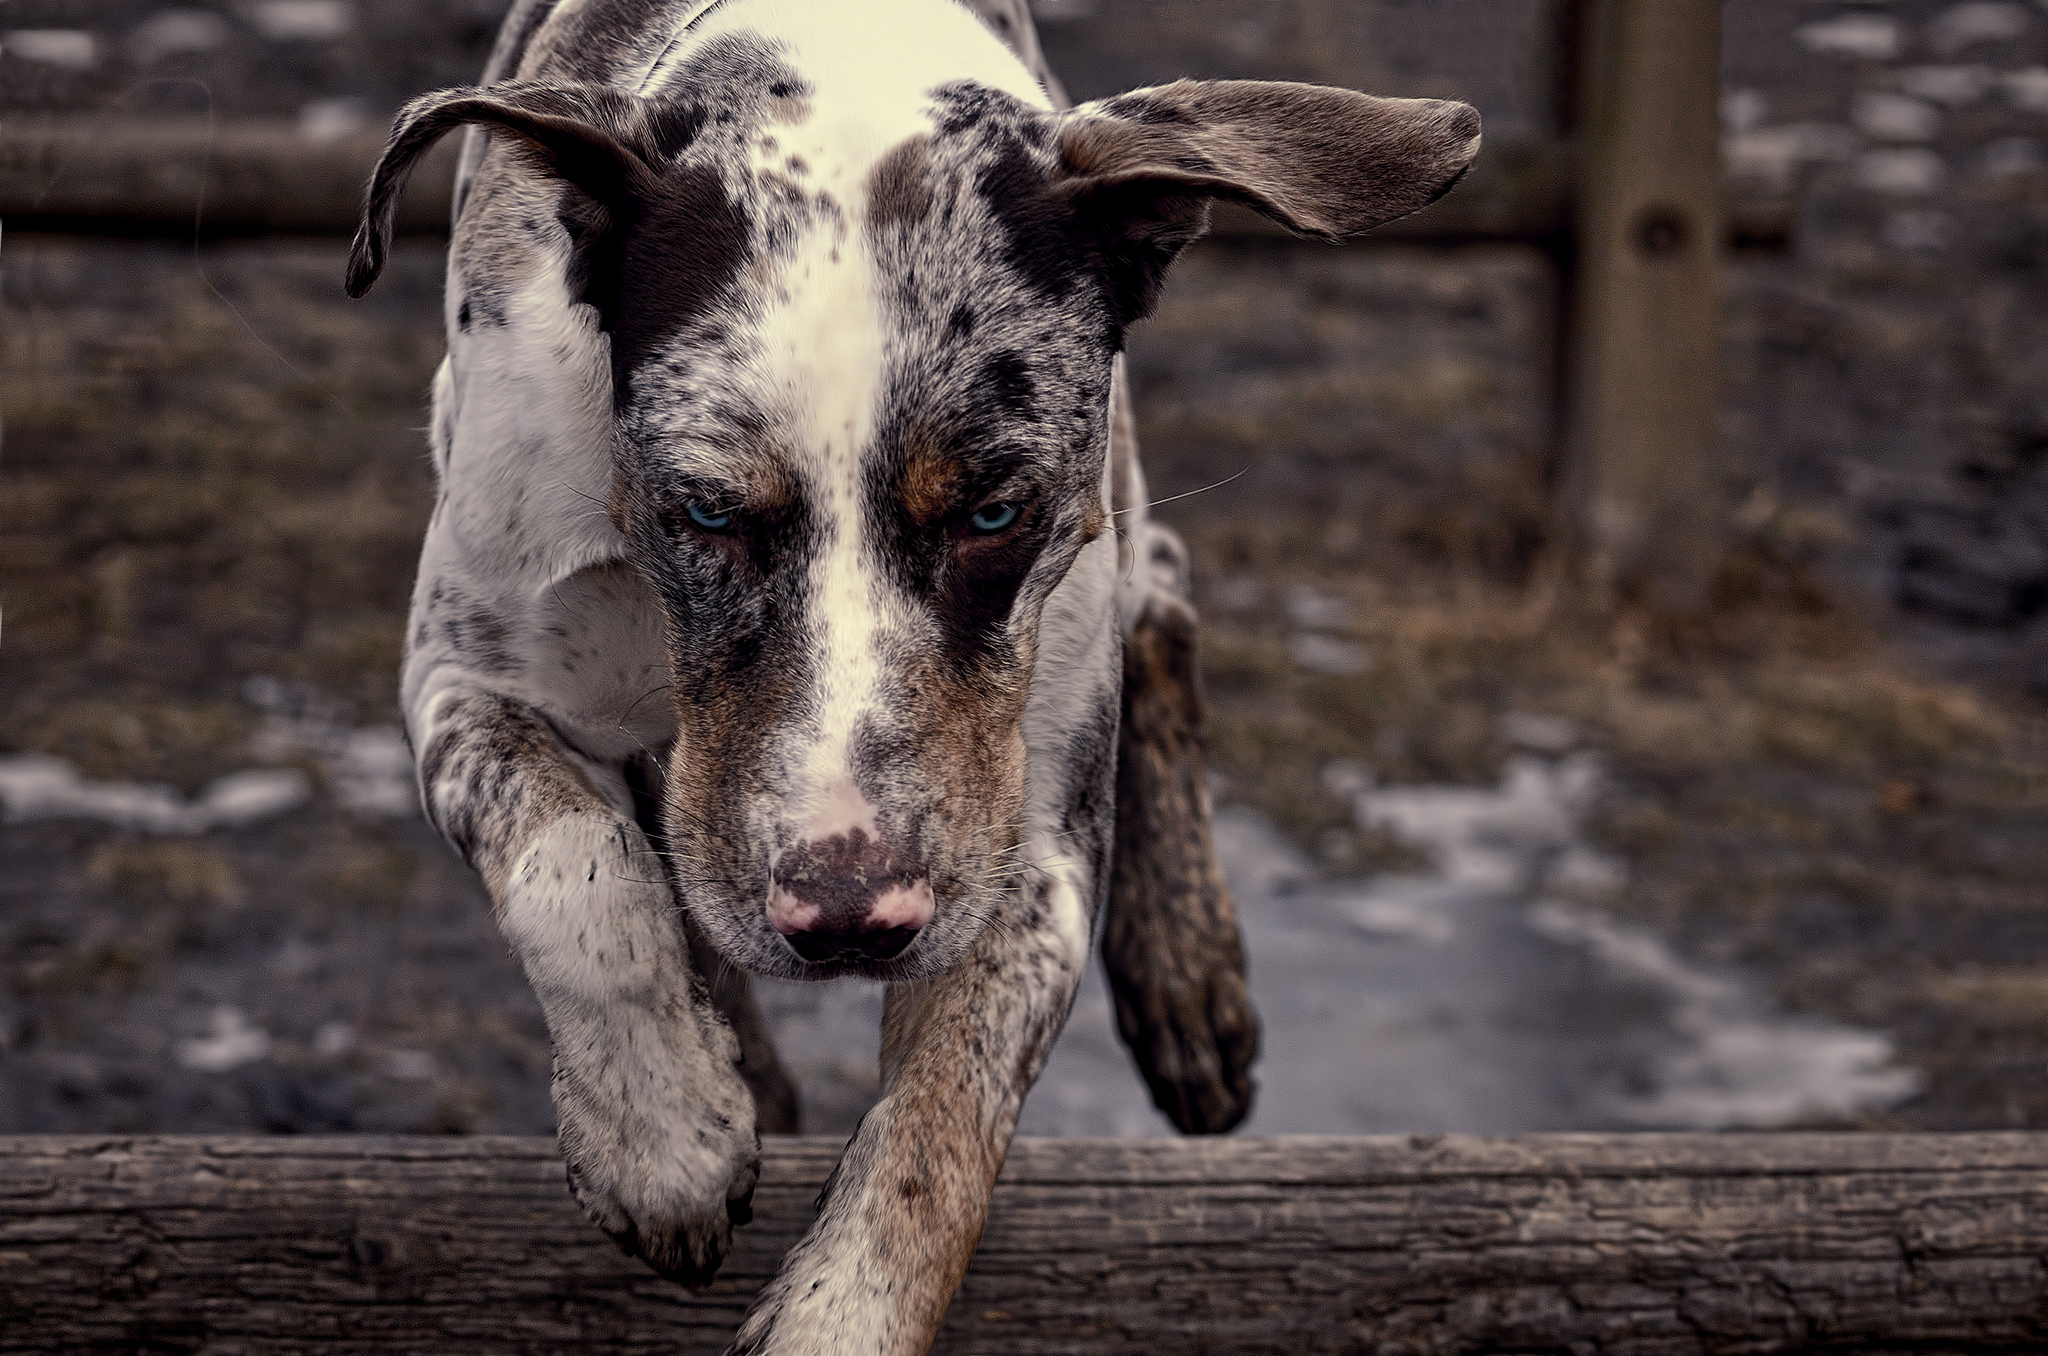 Running Catahoula Cur dog photo and wallpaper. Beautiful Running Catahoula Cur dog picture